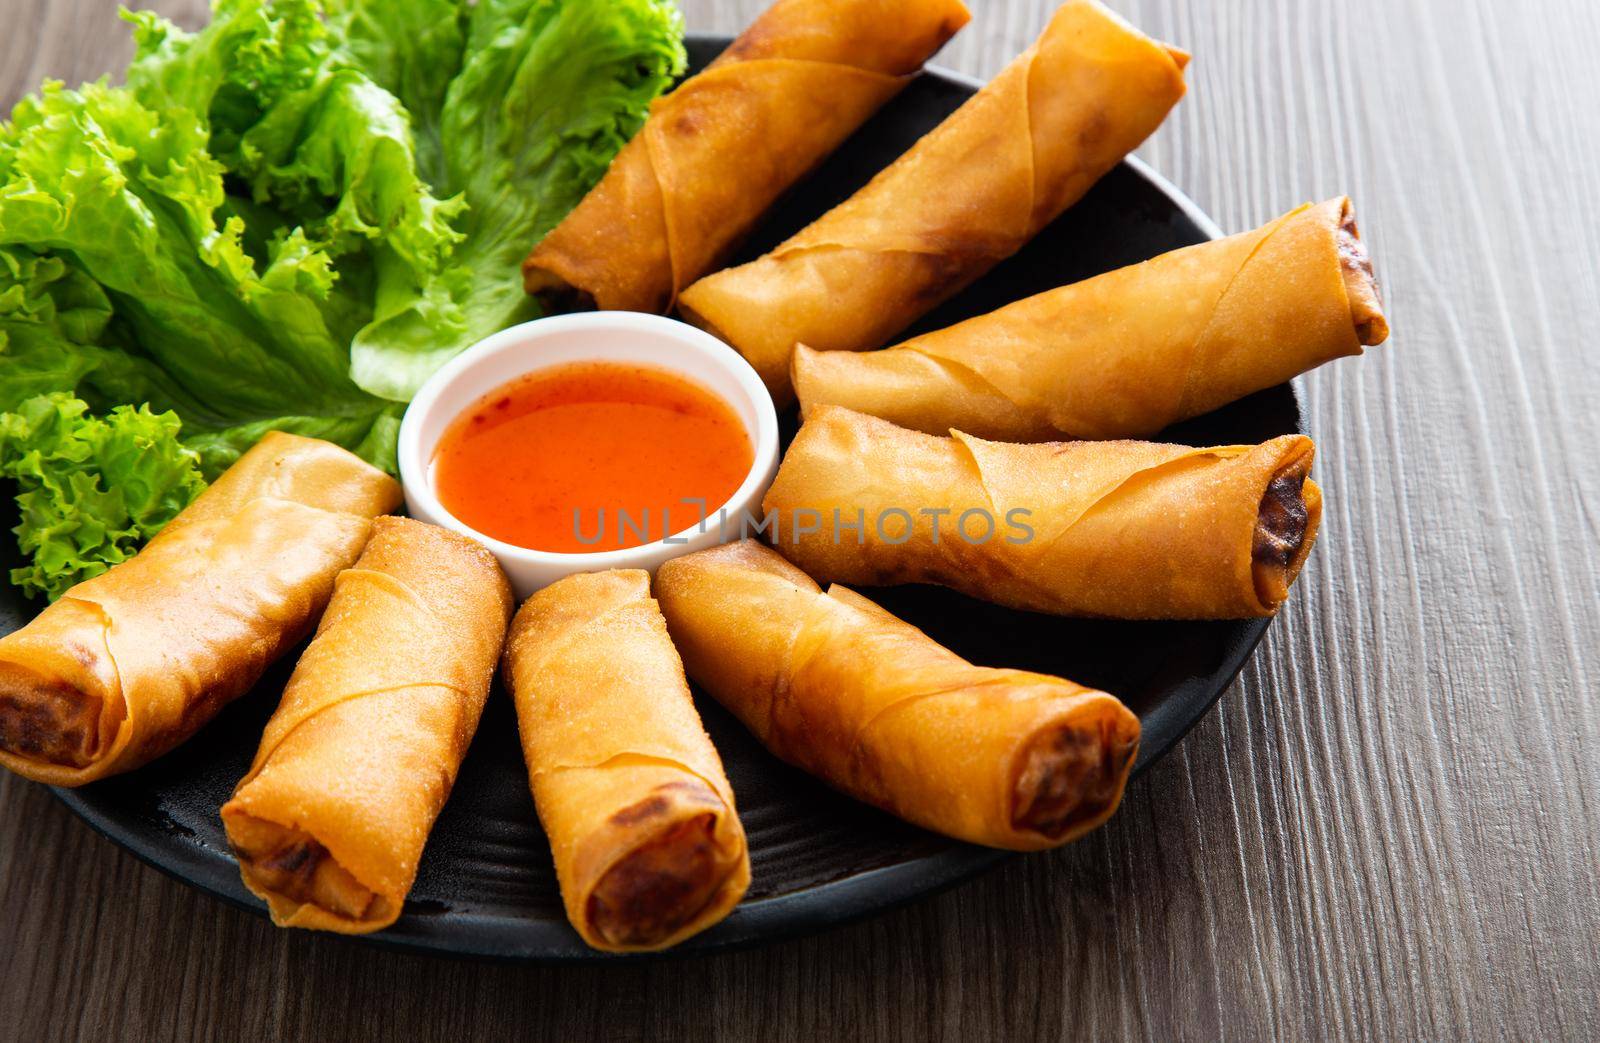 Popiah, deep fried spring rolls by tehcheesiong